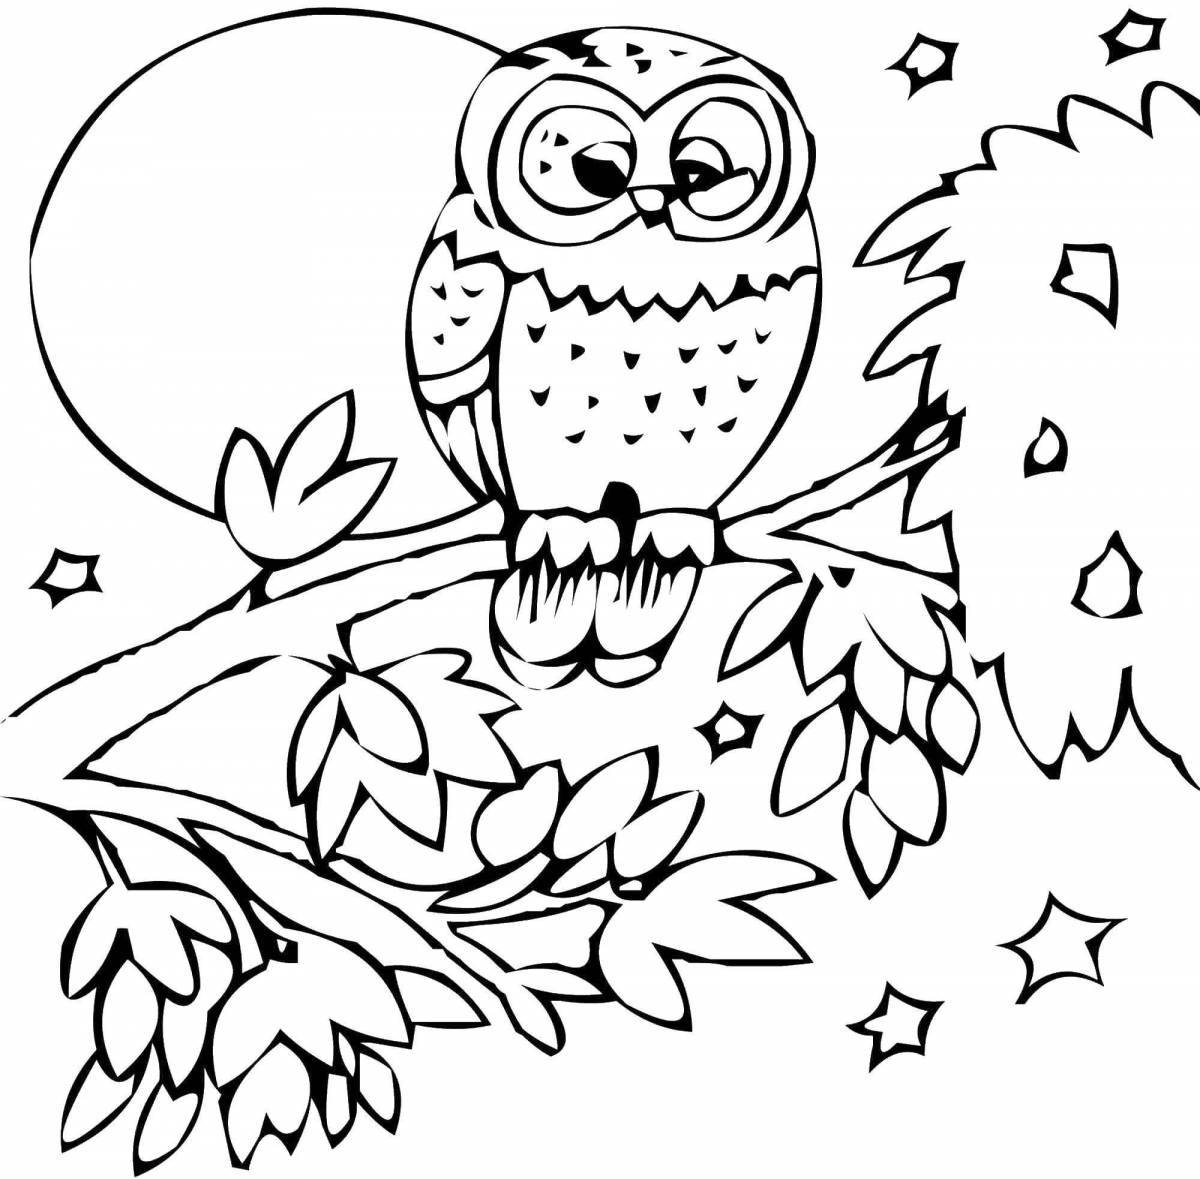 Radiant bird coloring pages for kids